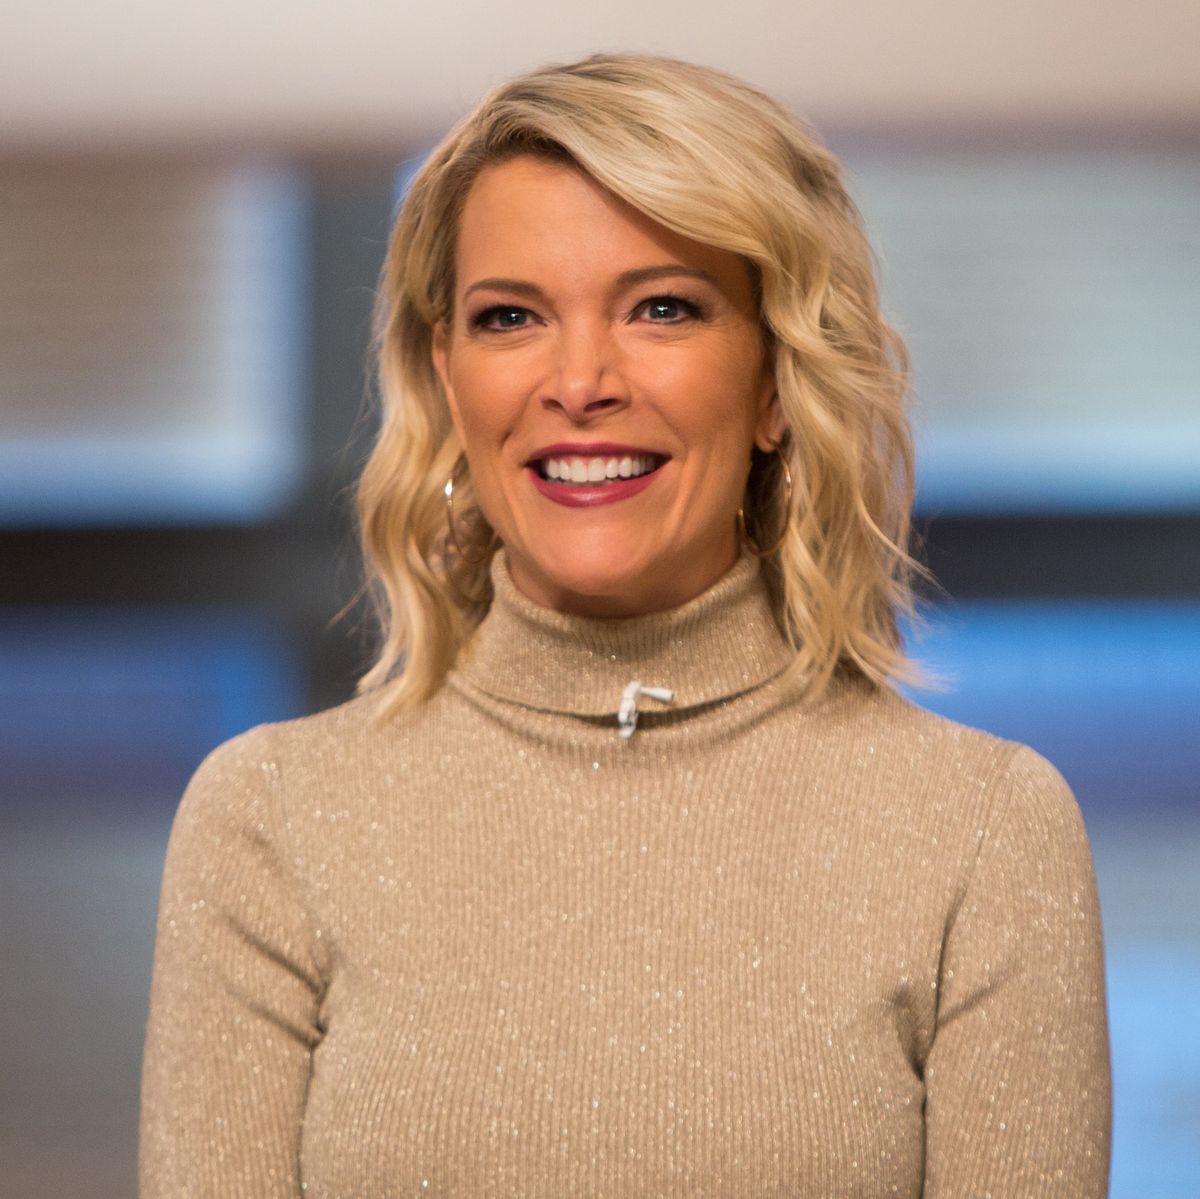 Megyn Kelly TODAY - Season 1 MEGYN KELLY TODAY -- Pictured: Megyn Kelly on Wednesday, December 20, 2017 -- (Photo by: Nathan Congleton/NBCU Photo Bank/NBCUniversal via Getty Images via Getty Images)